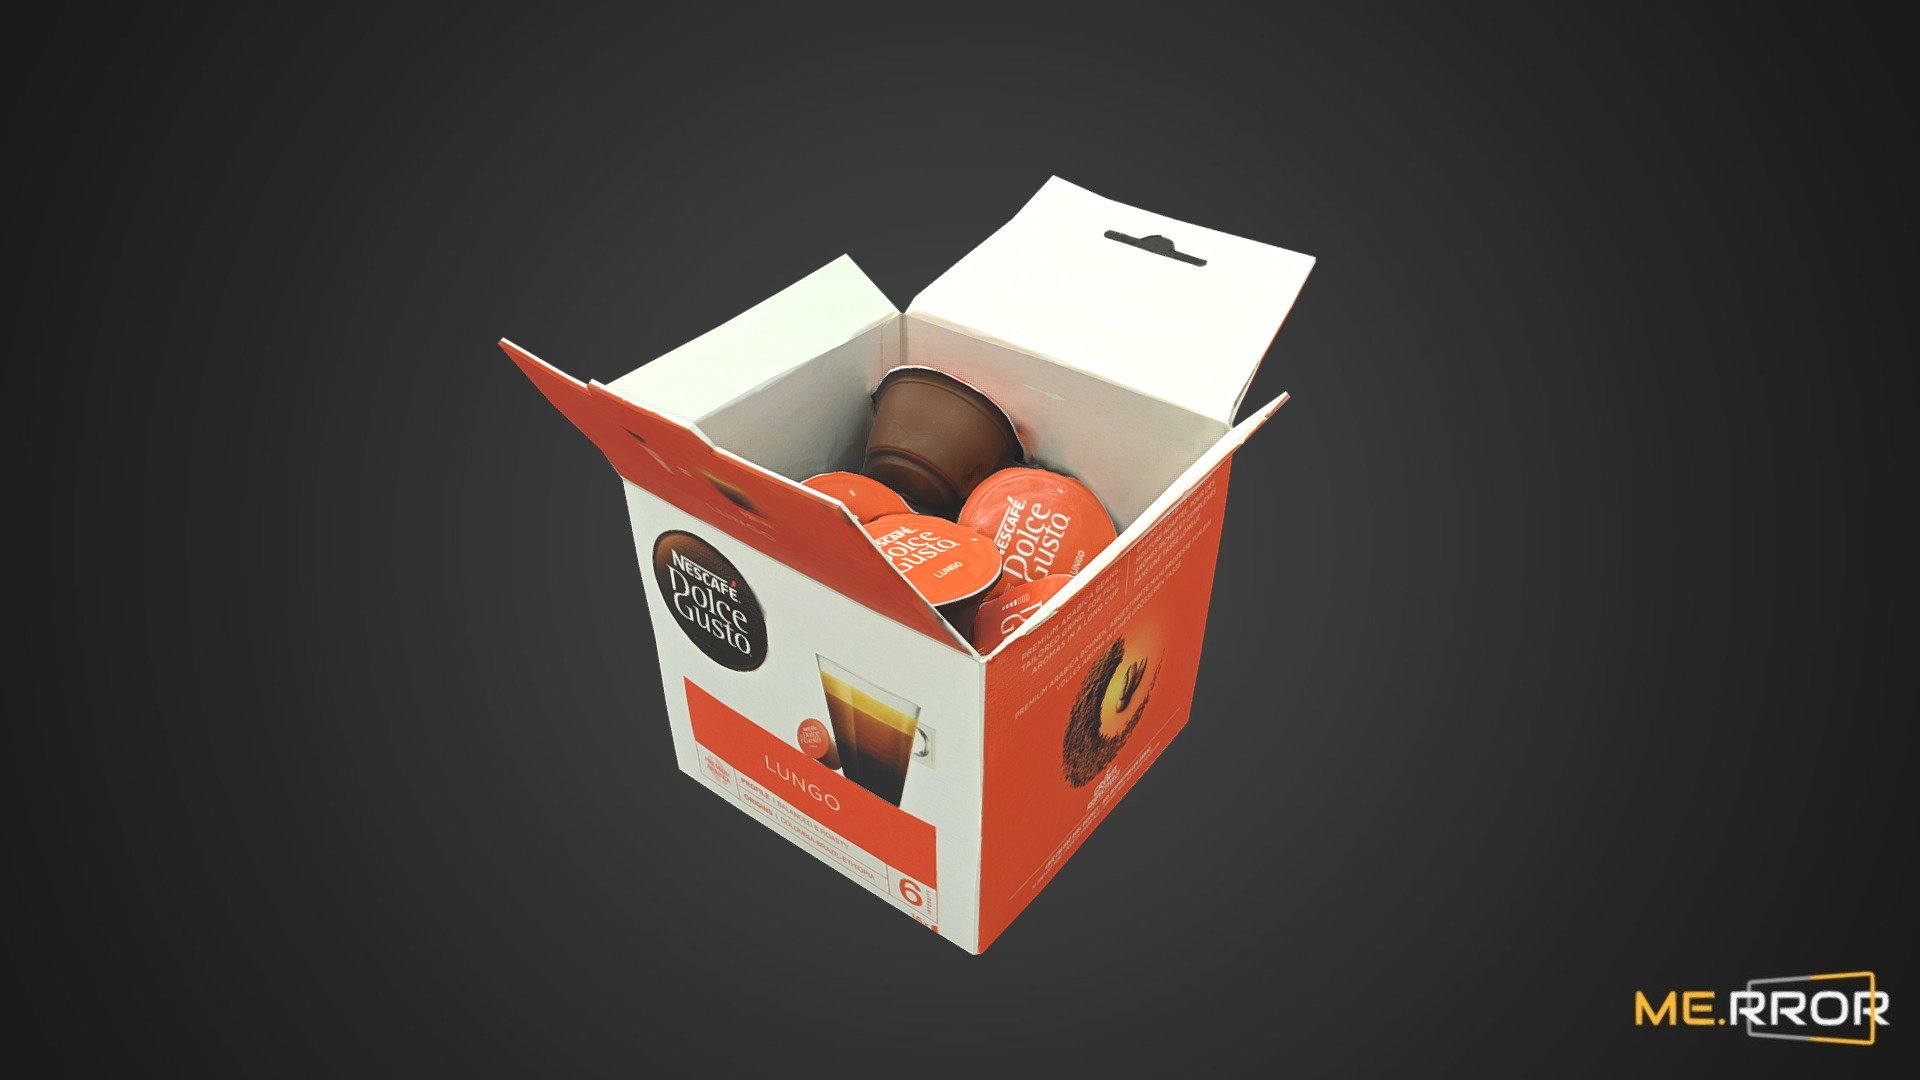 MERROR is a 3D Content PLATFORM which introduces various Asian assets to the 3D world

#3DScanning #Photogrametry #ME.RROR - [Game-Ready] Coffee Capsule Box - Buy Royalty Free 3D model by ME.RROR (@merror) 3d model